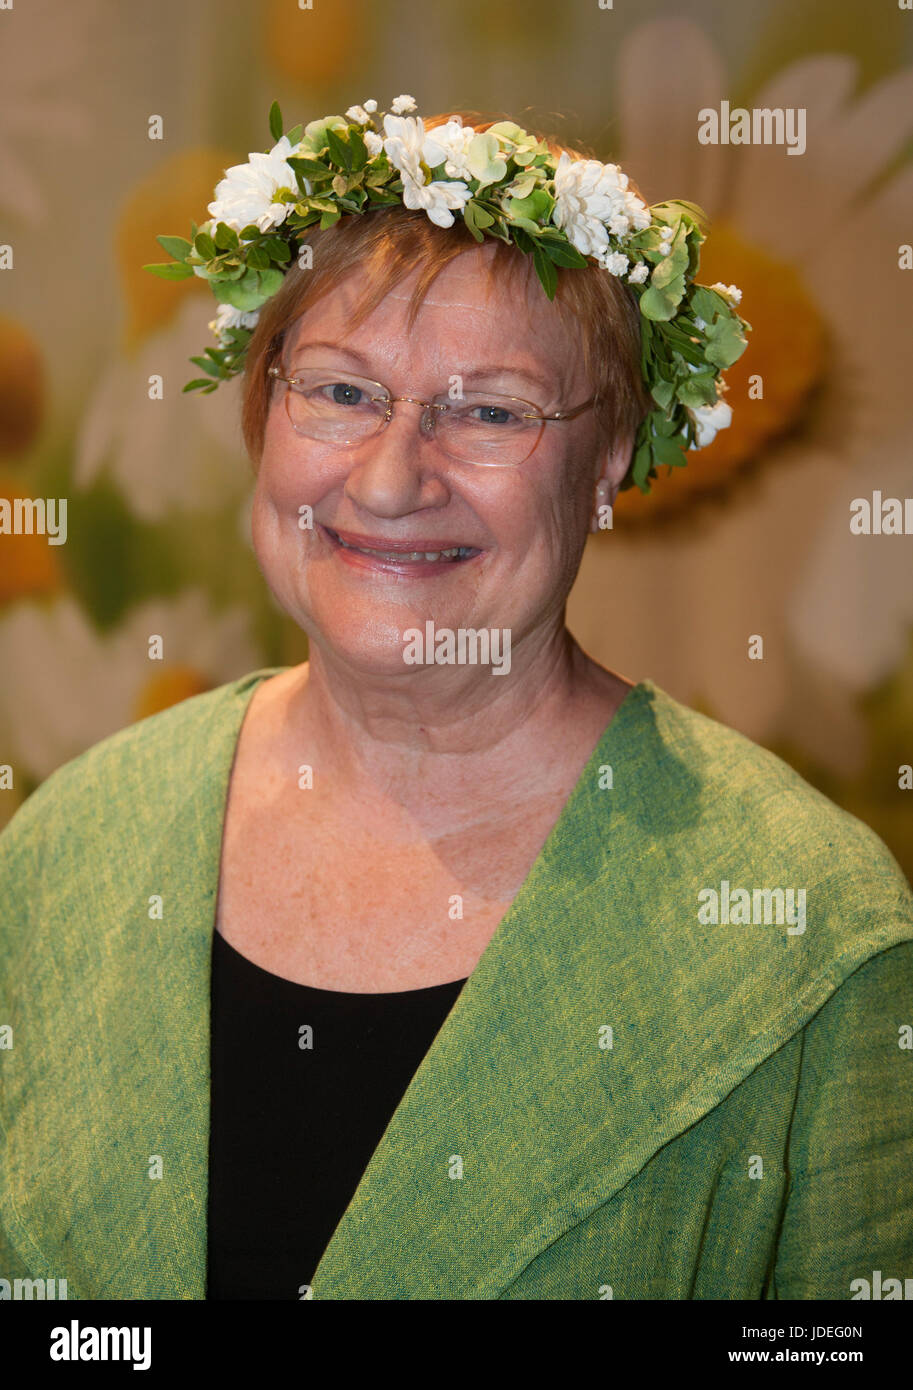 TARJA HALONEN former Finish president with flower ring on the head 2017 Stock Photo